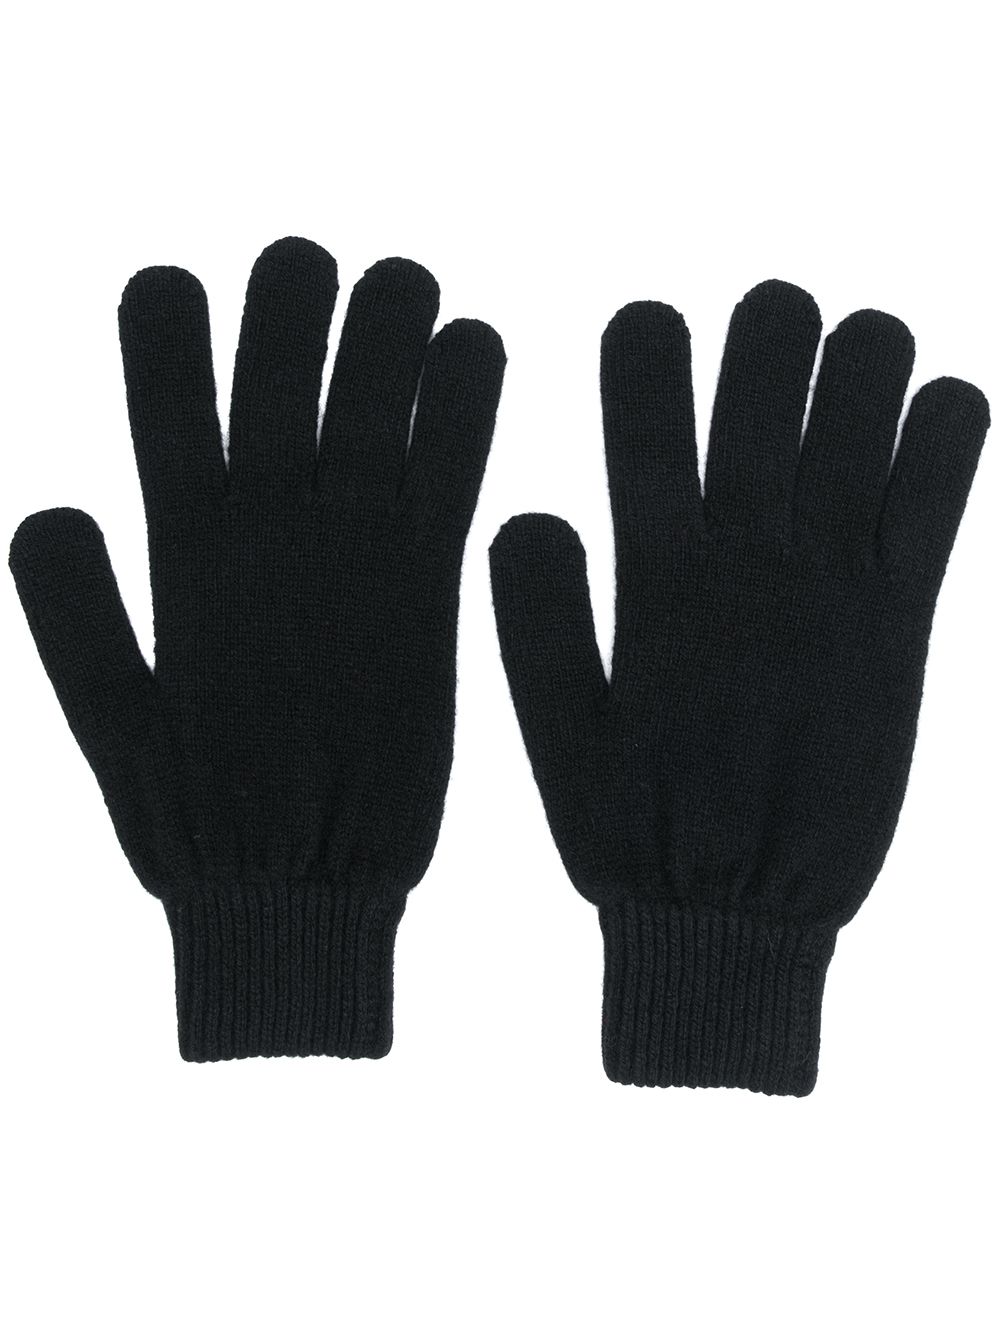 Paul Smith fitted knitted gloves - Black von Paul Smith